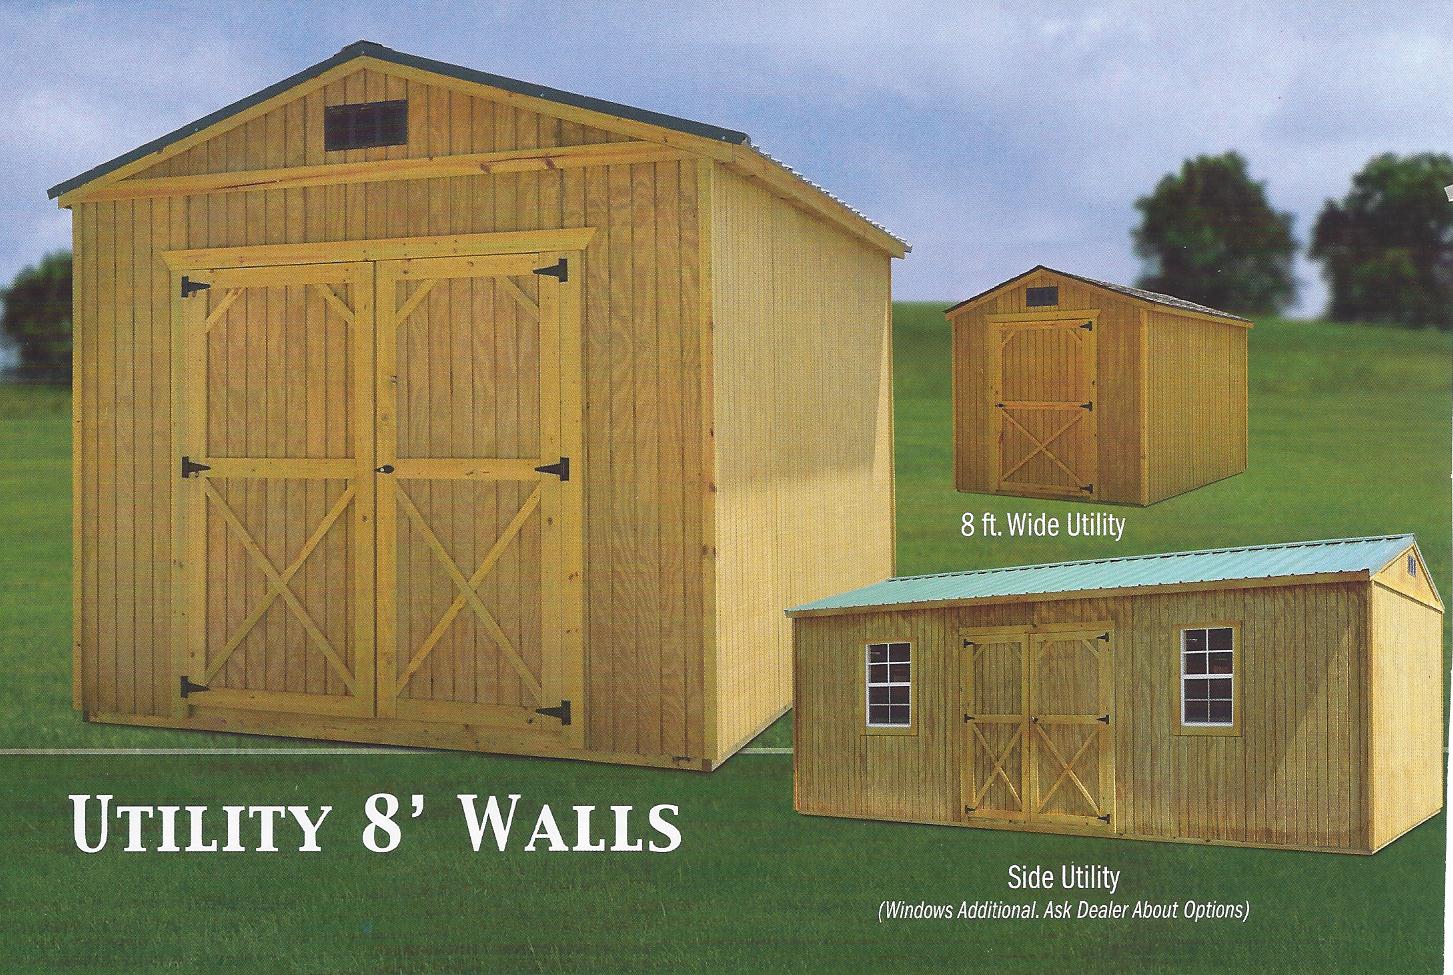 Rent to Own Storage Buildings, Sheds, Garages, Carports, Barns